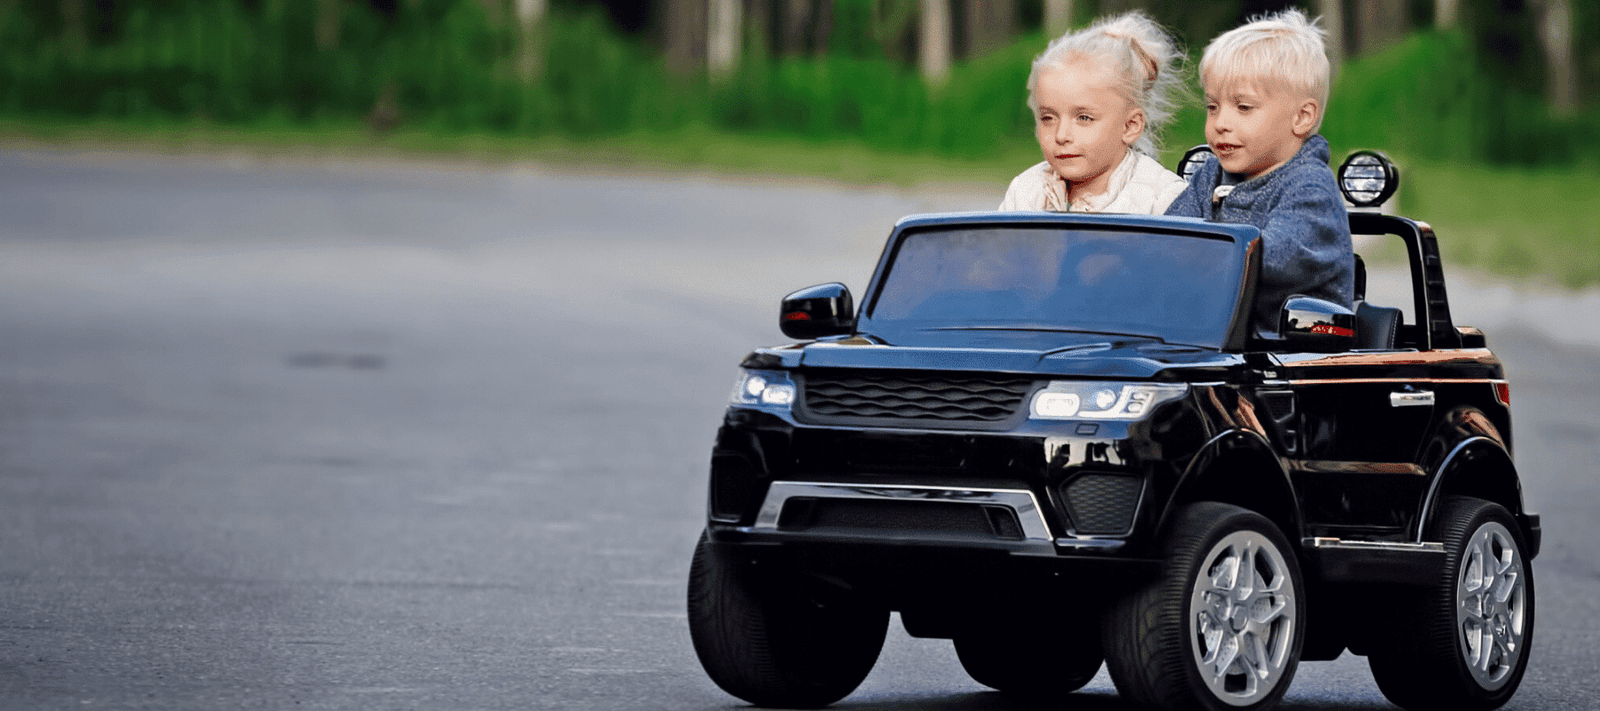 Big Kid Rides Ages 8 to 12 - Car Tots Remote Control Ride On Cars, Trucks,  SUVs and jeeps